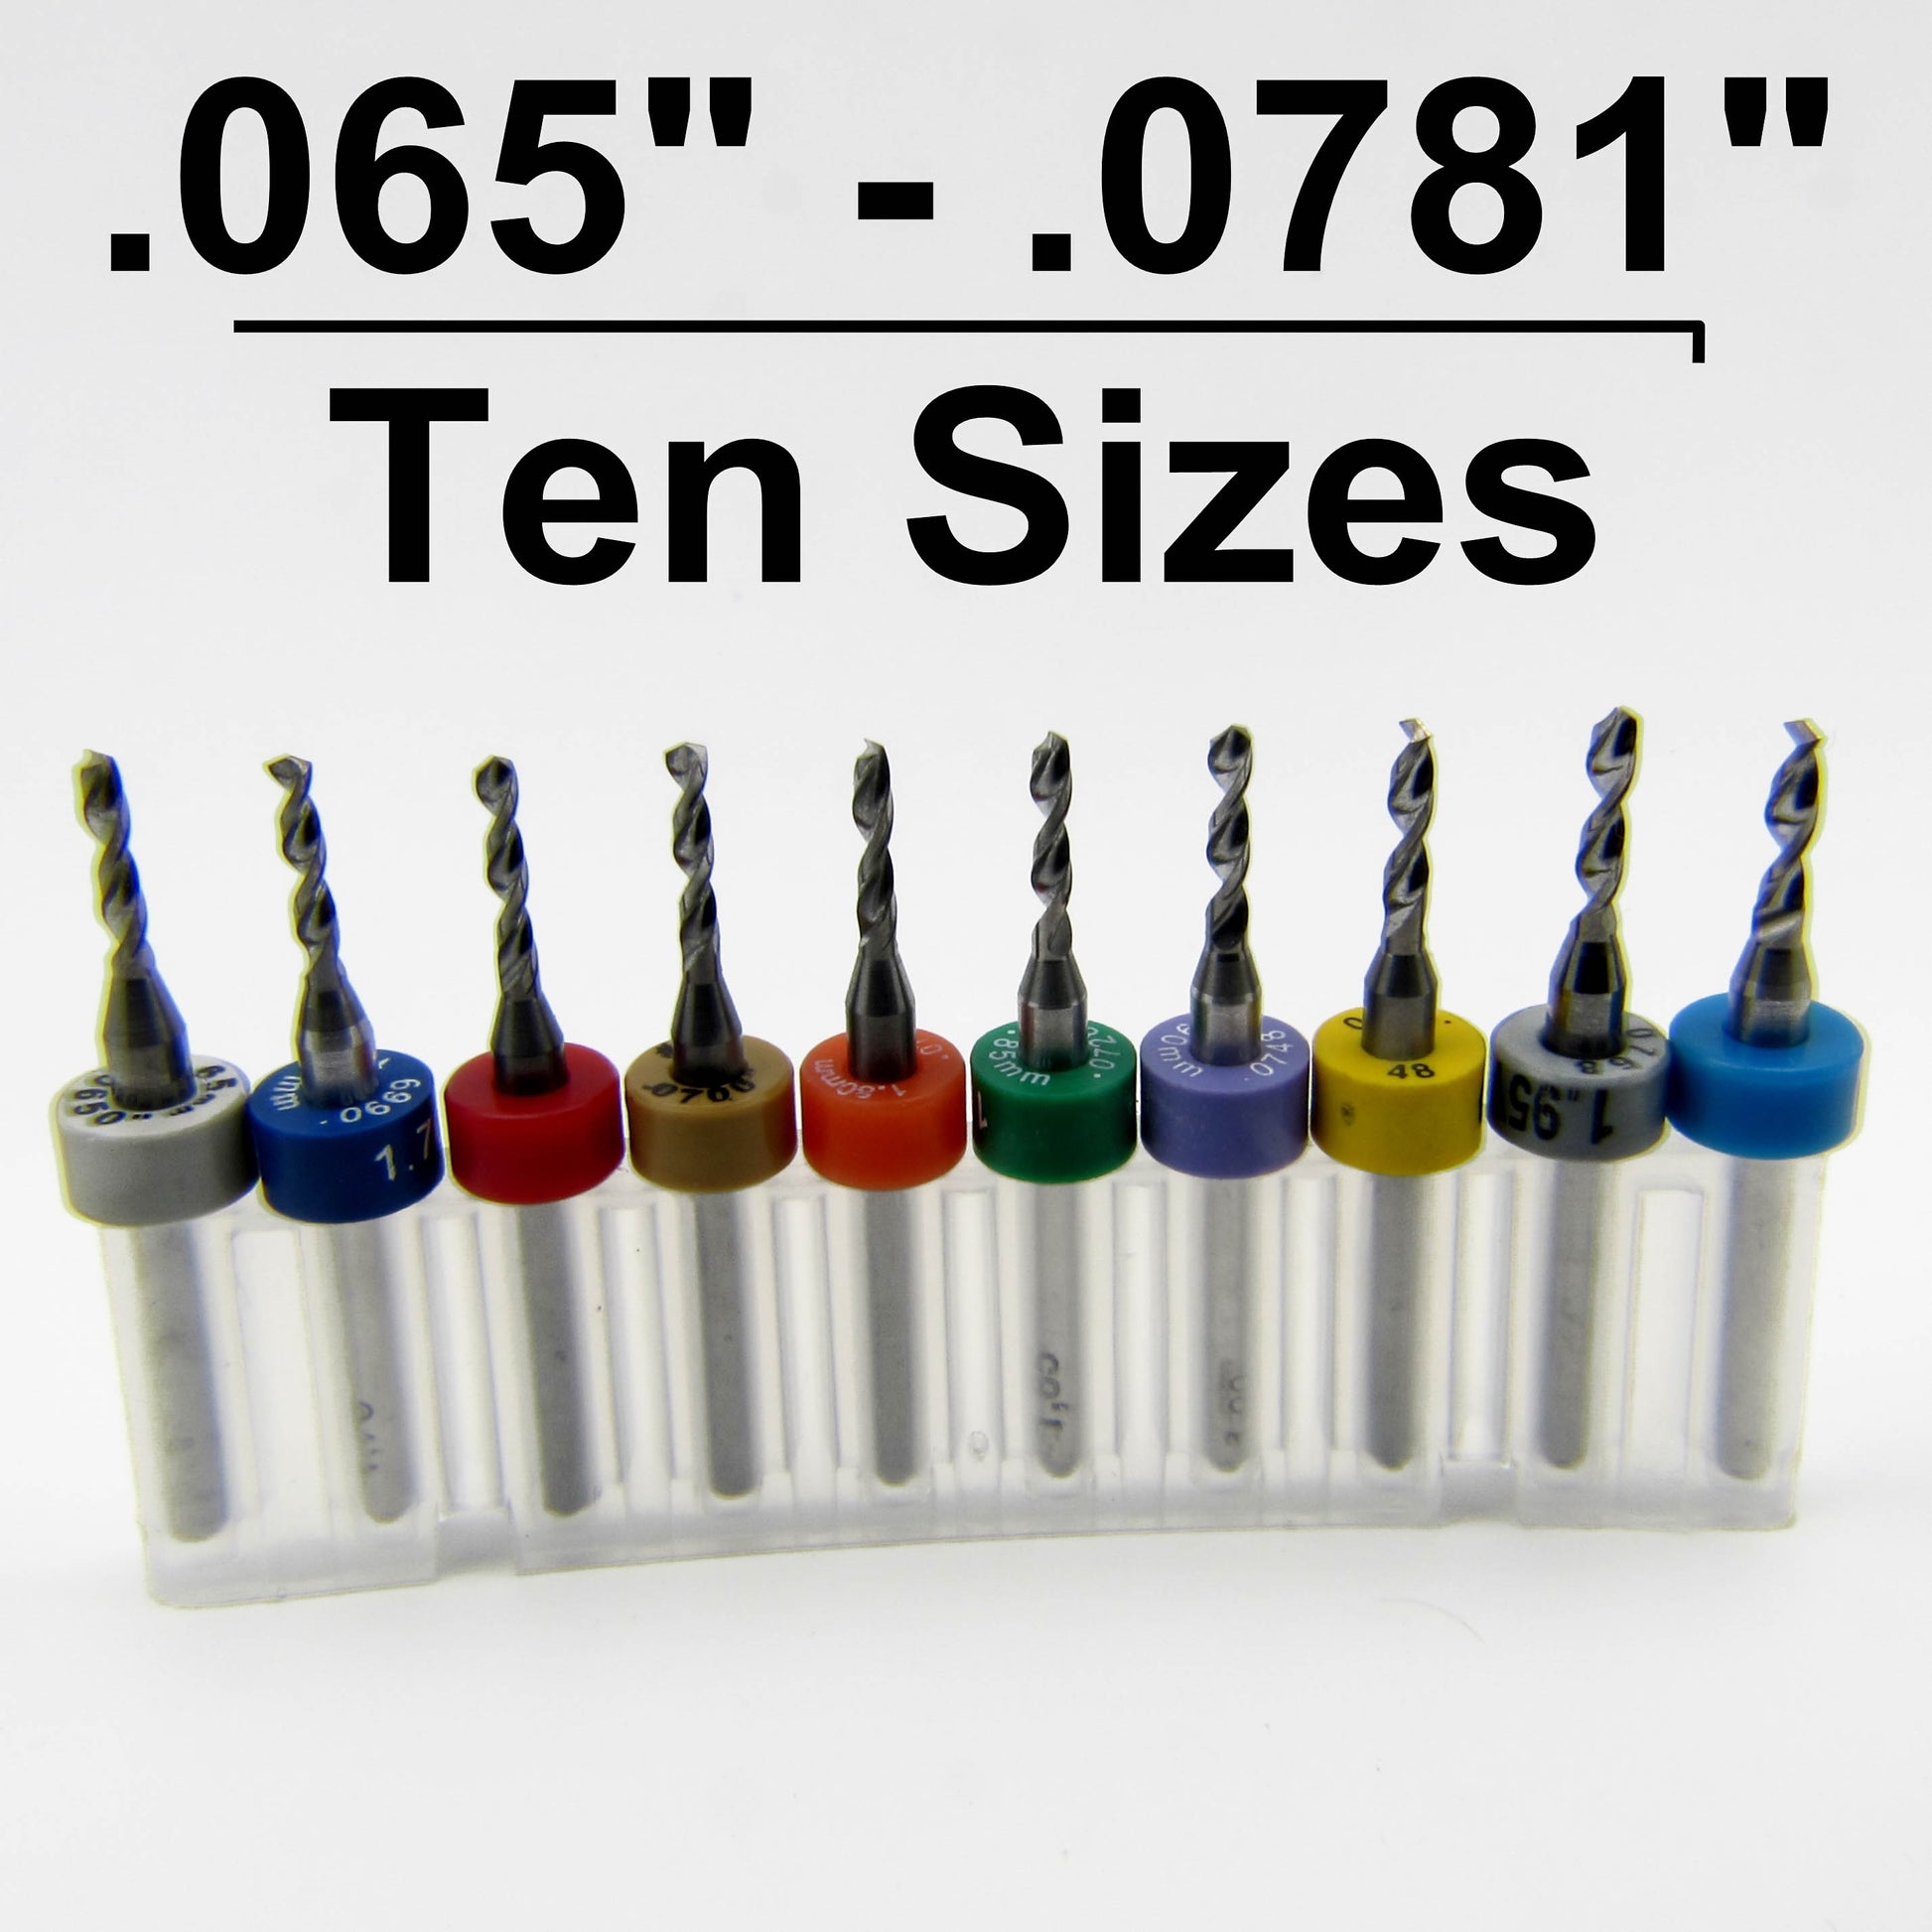 Ten-Piece Incremental Solid Carbide Drill Bit Set - Sizes .065 to .0781 Inches. Includes drill sizes 1.65mm .065" 1.70mm .067" 1.75mm .068" .070" #50 .073" 1.85mm 1.90mm .076" 1.95mm 5/64"